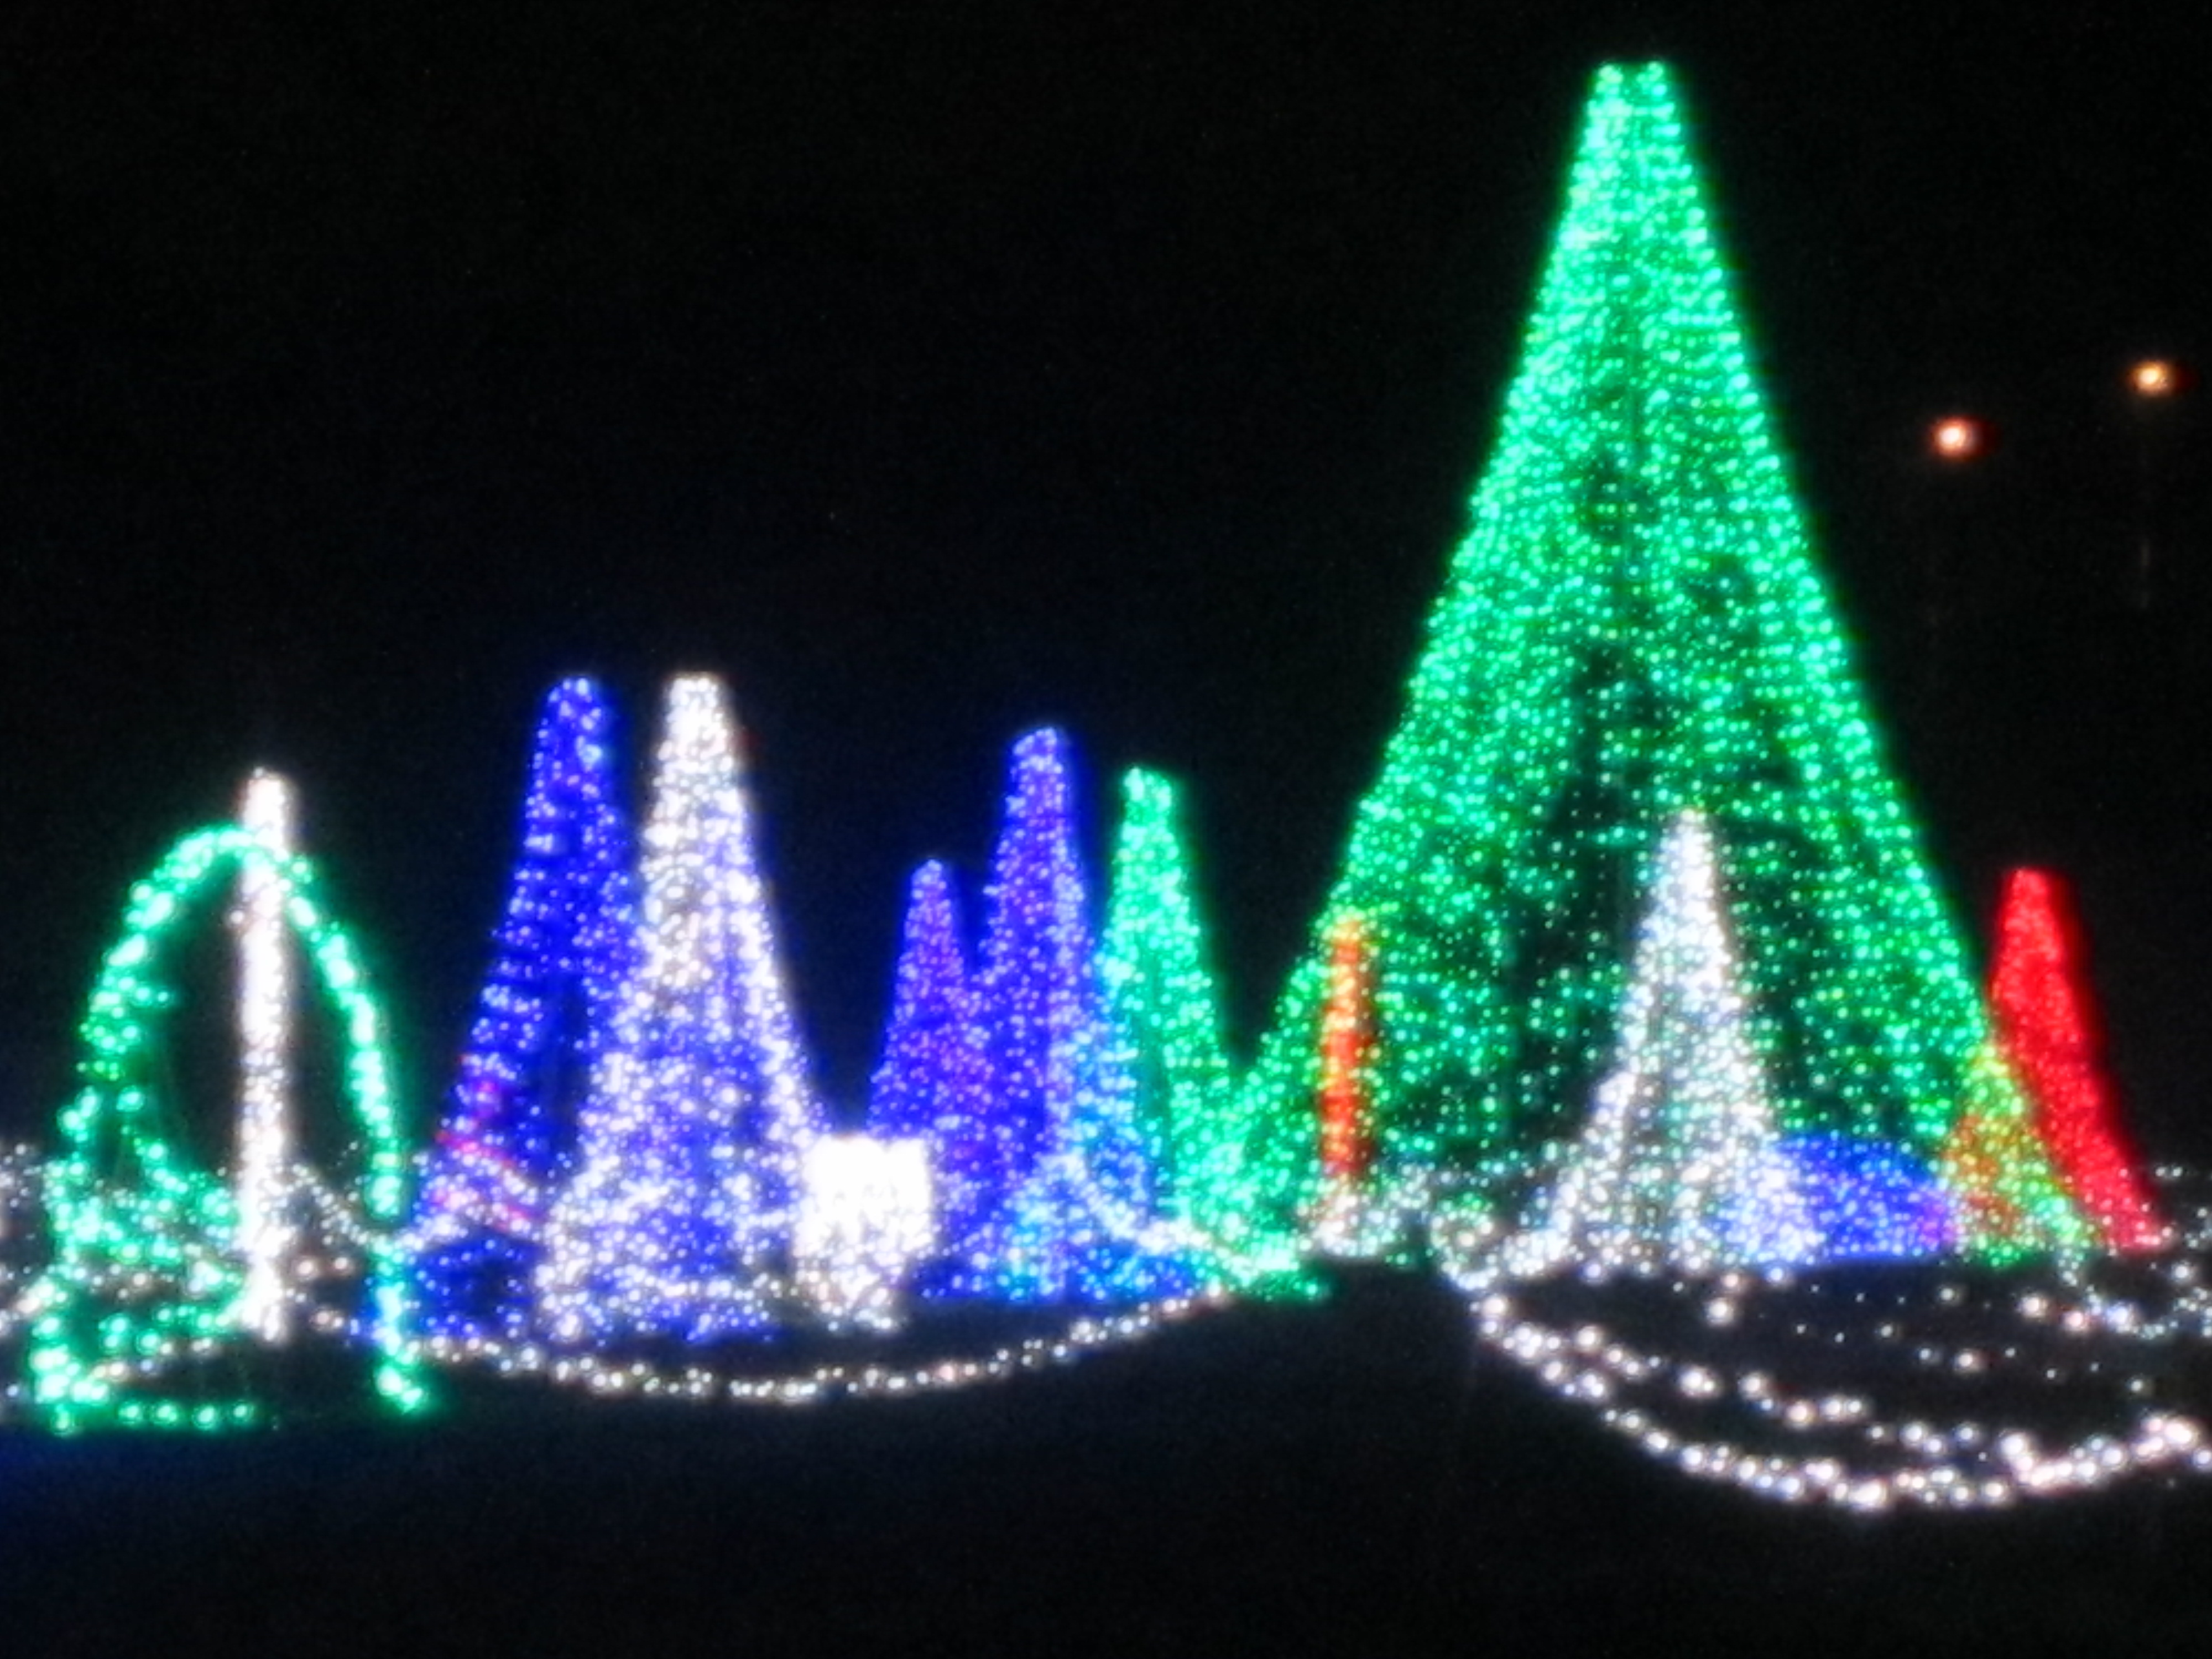 The New Drive Through Holiday Light Display In Jacksonville Fl Is A Real Kid Pleaser Locals Guide St Augustine